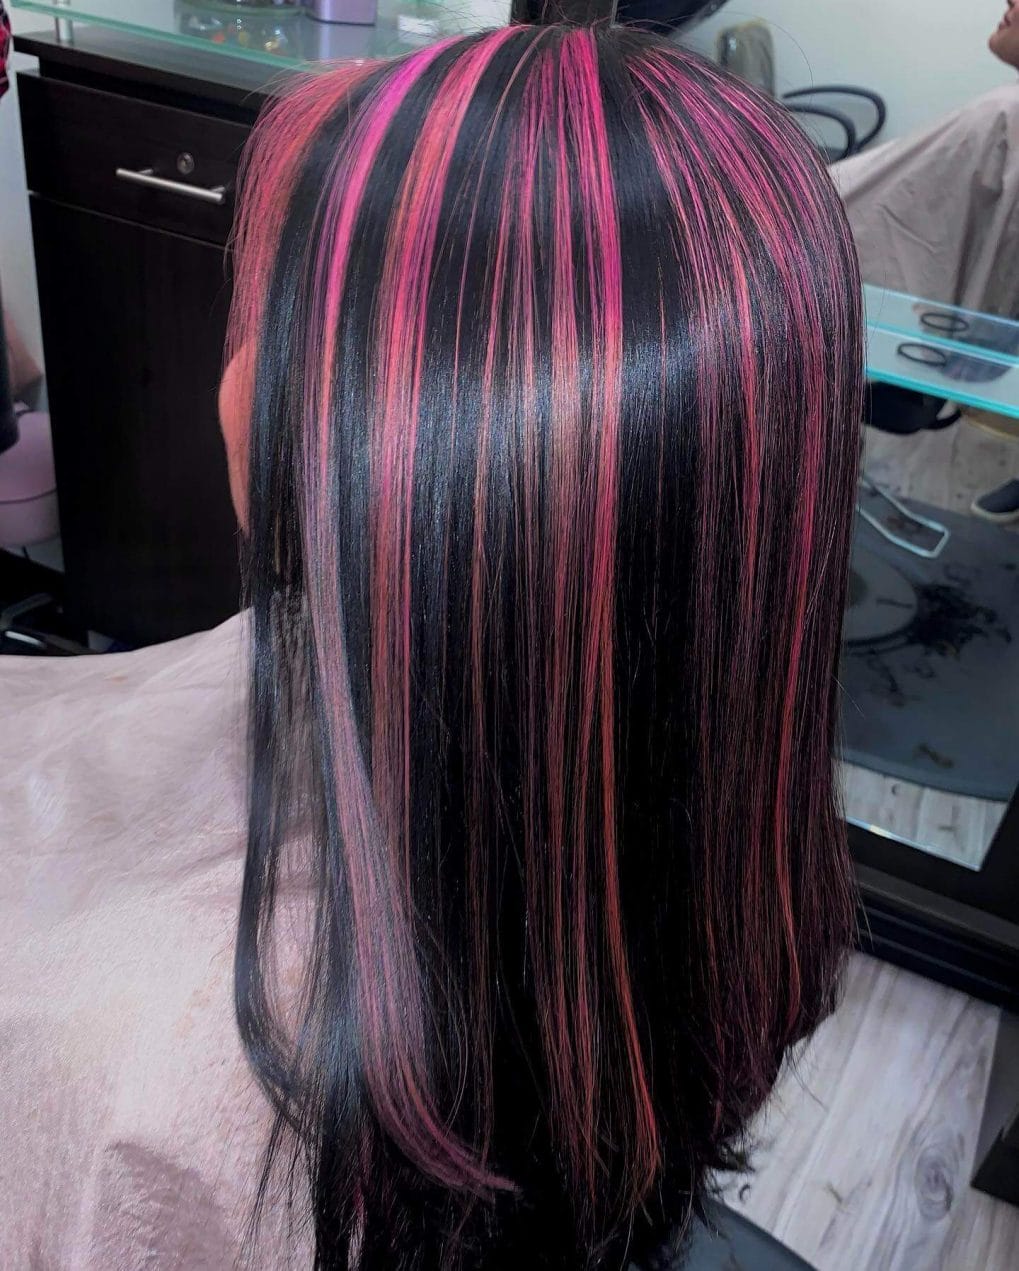 Long hair with soft layers featuring vivid fuchsia chunky highlights on black base.